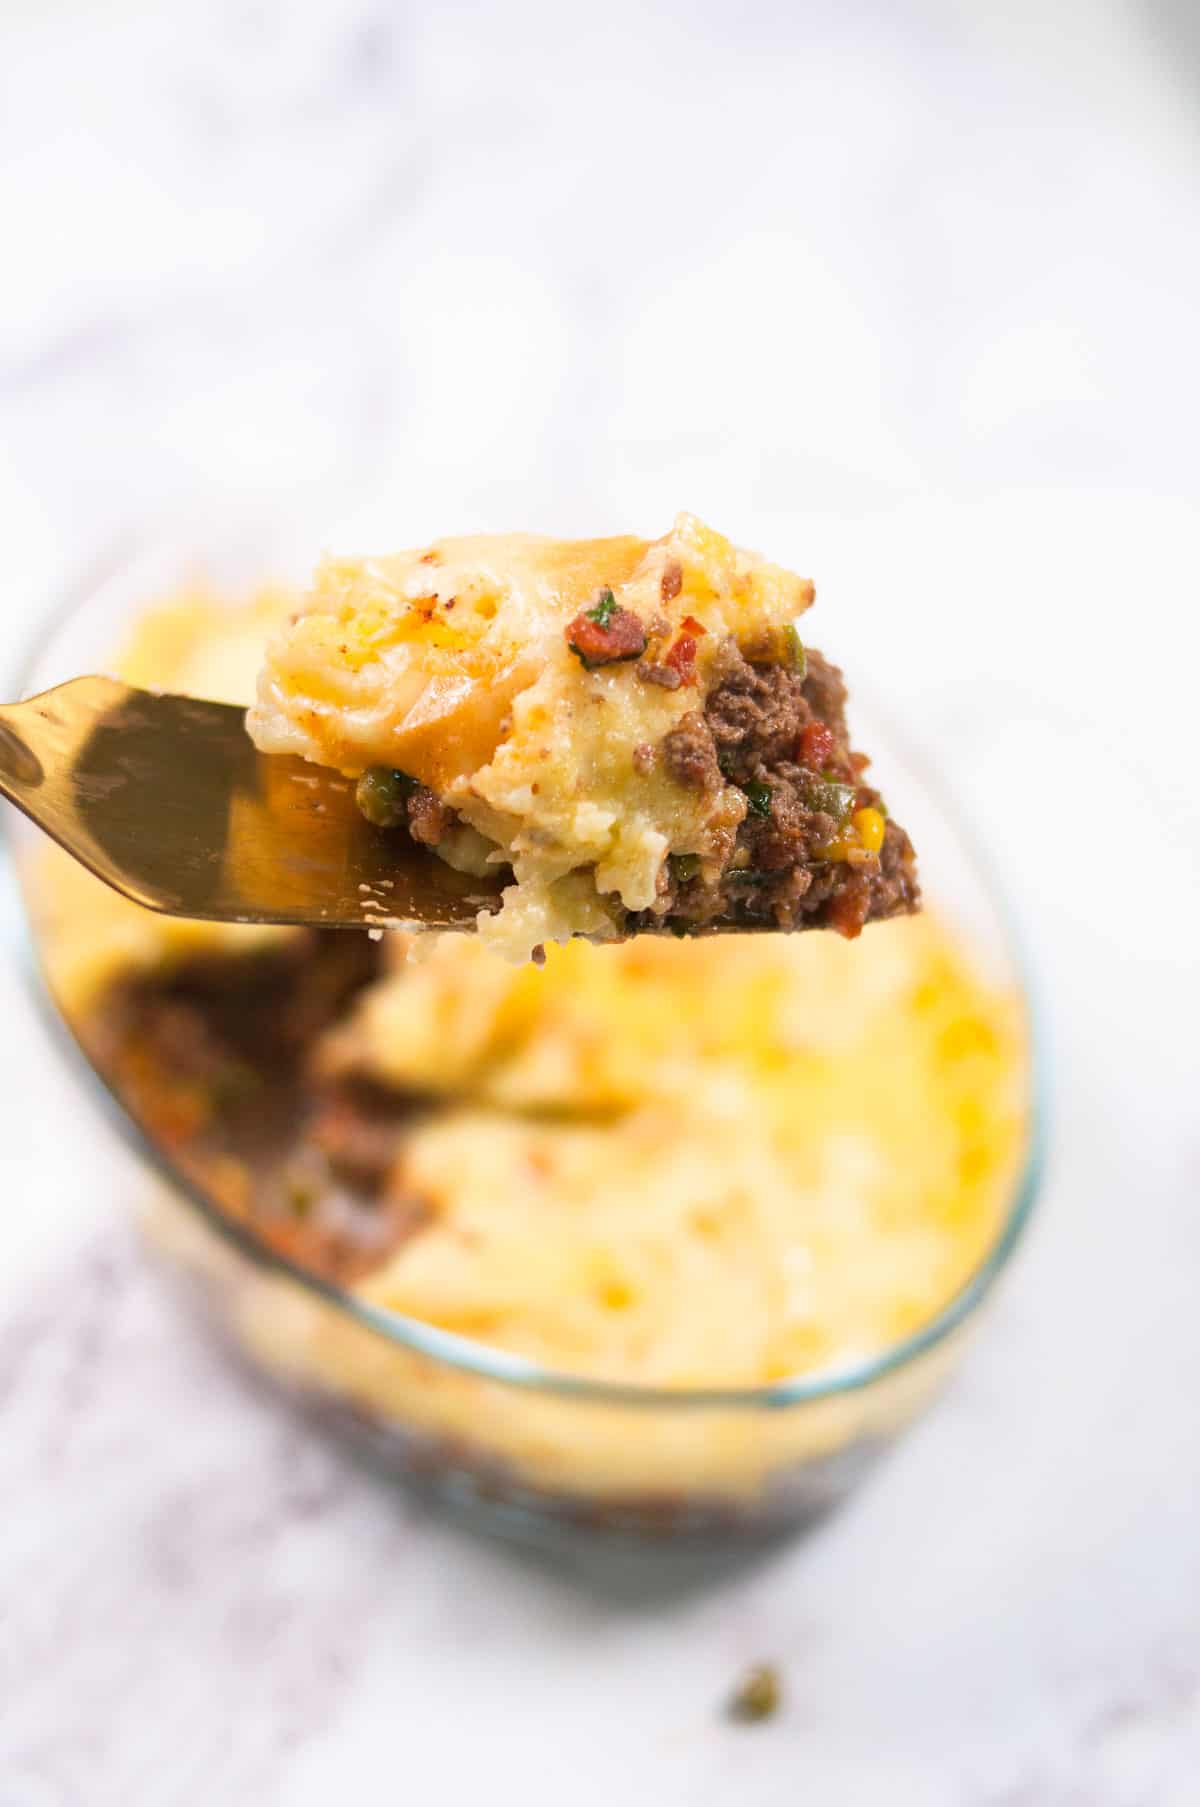 A small portion of shepherd's pie scooped out with a spoon.